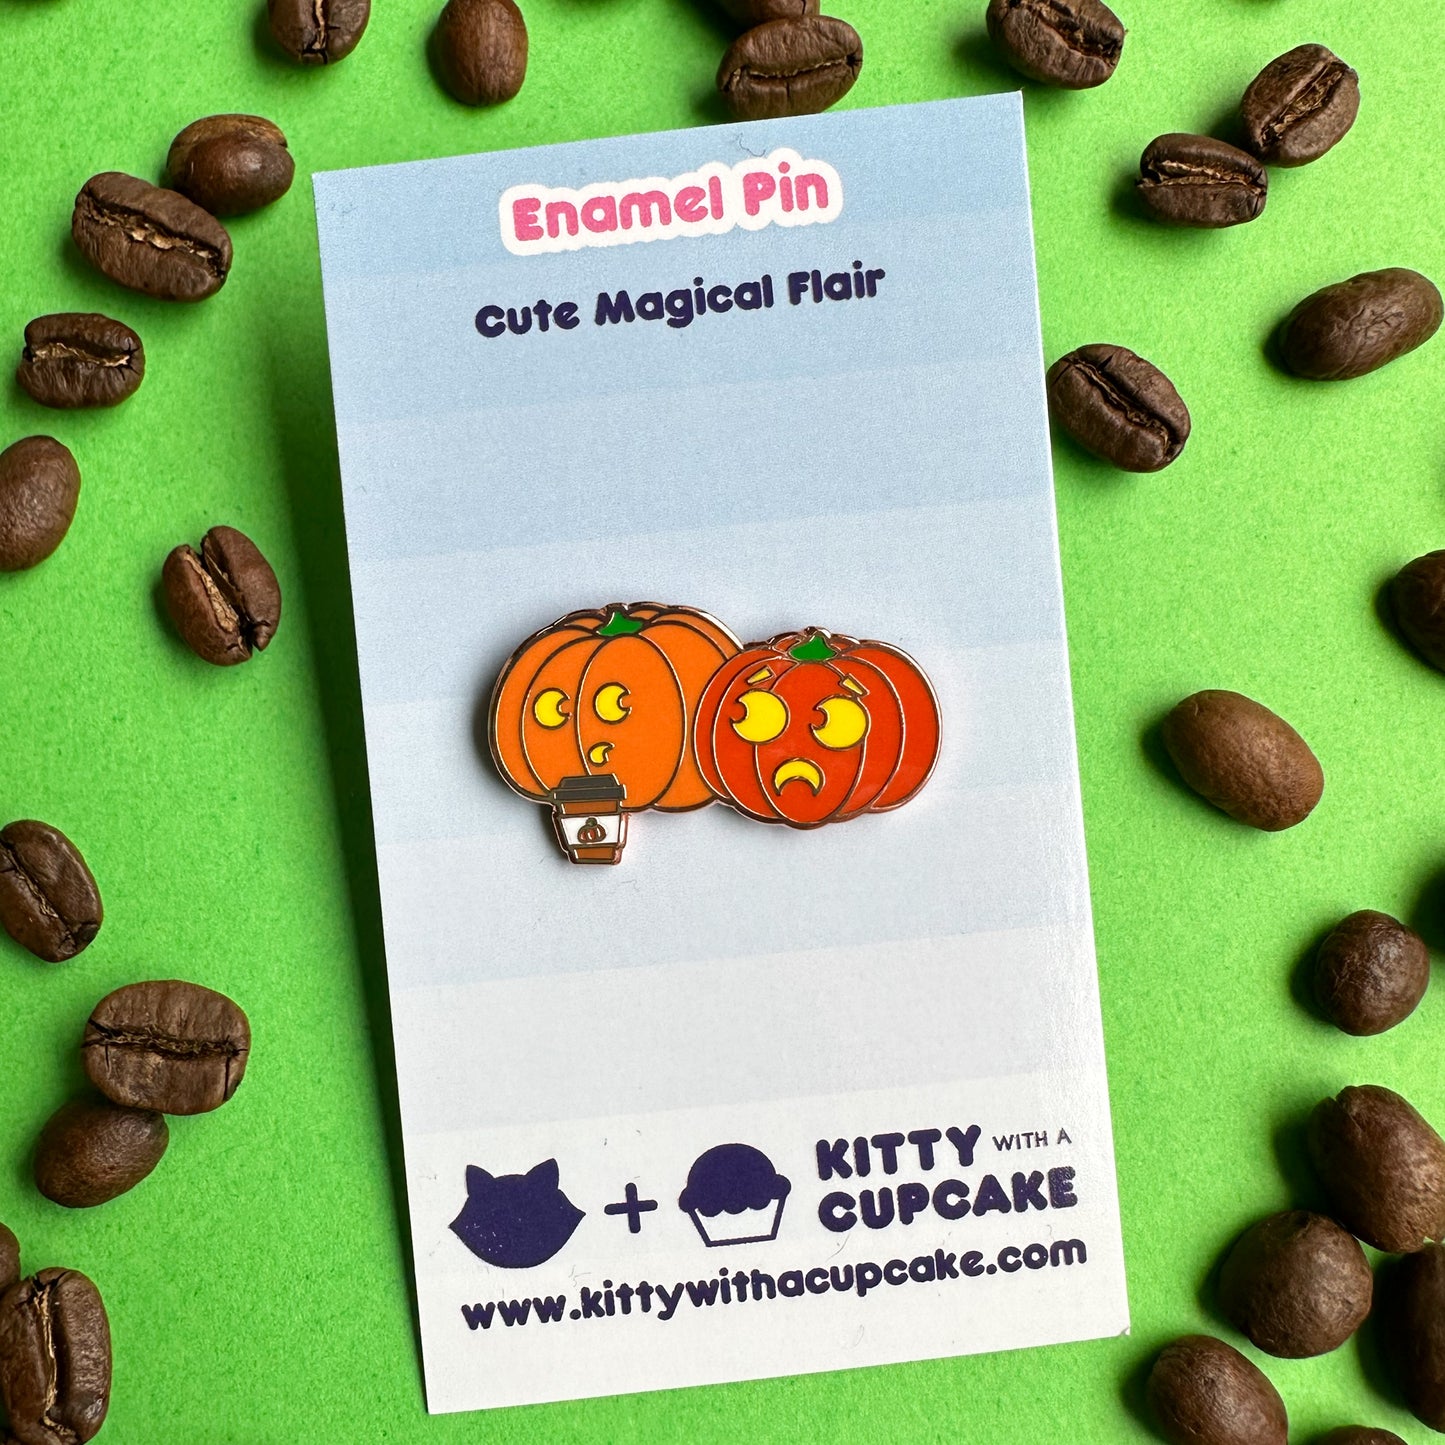 An enamel pin shaped like pumpkins one of them is drinking a pumpkin spice latte. The pin is on a blue card. 